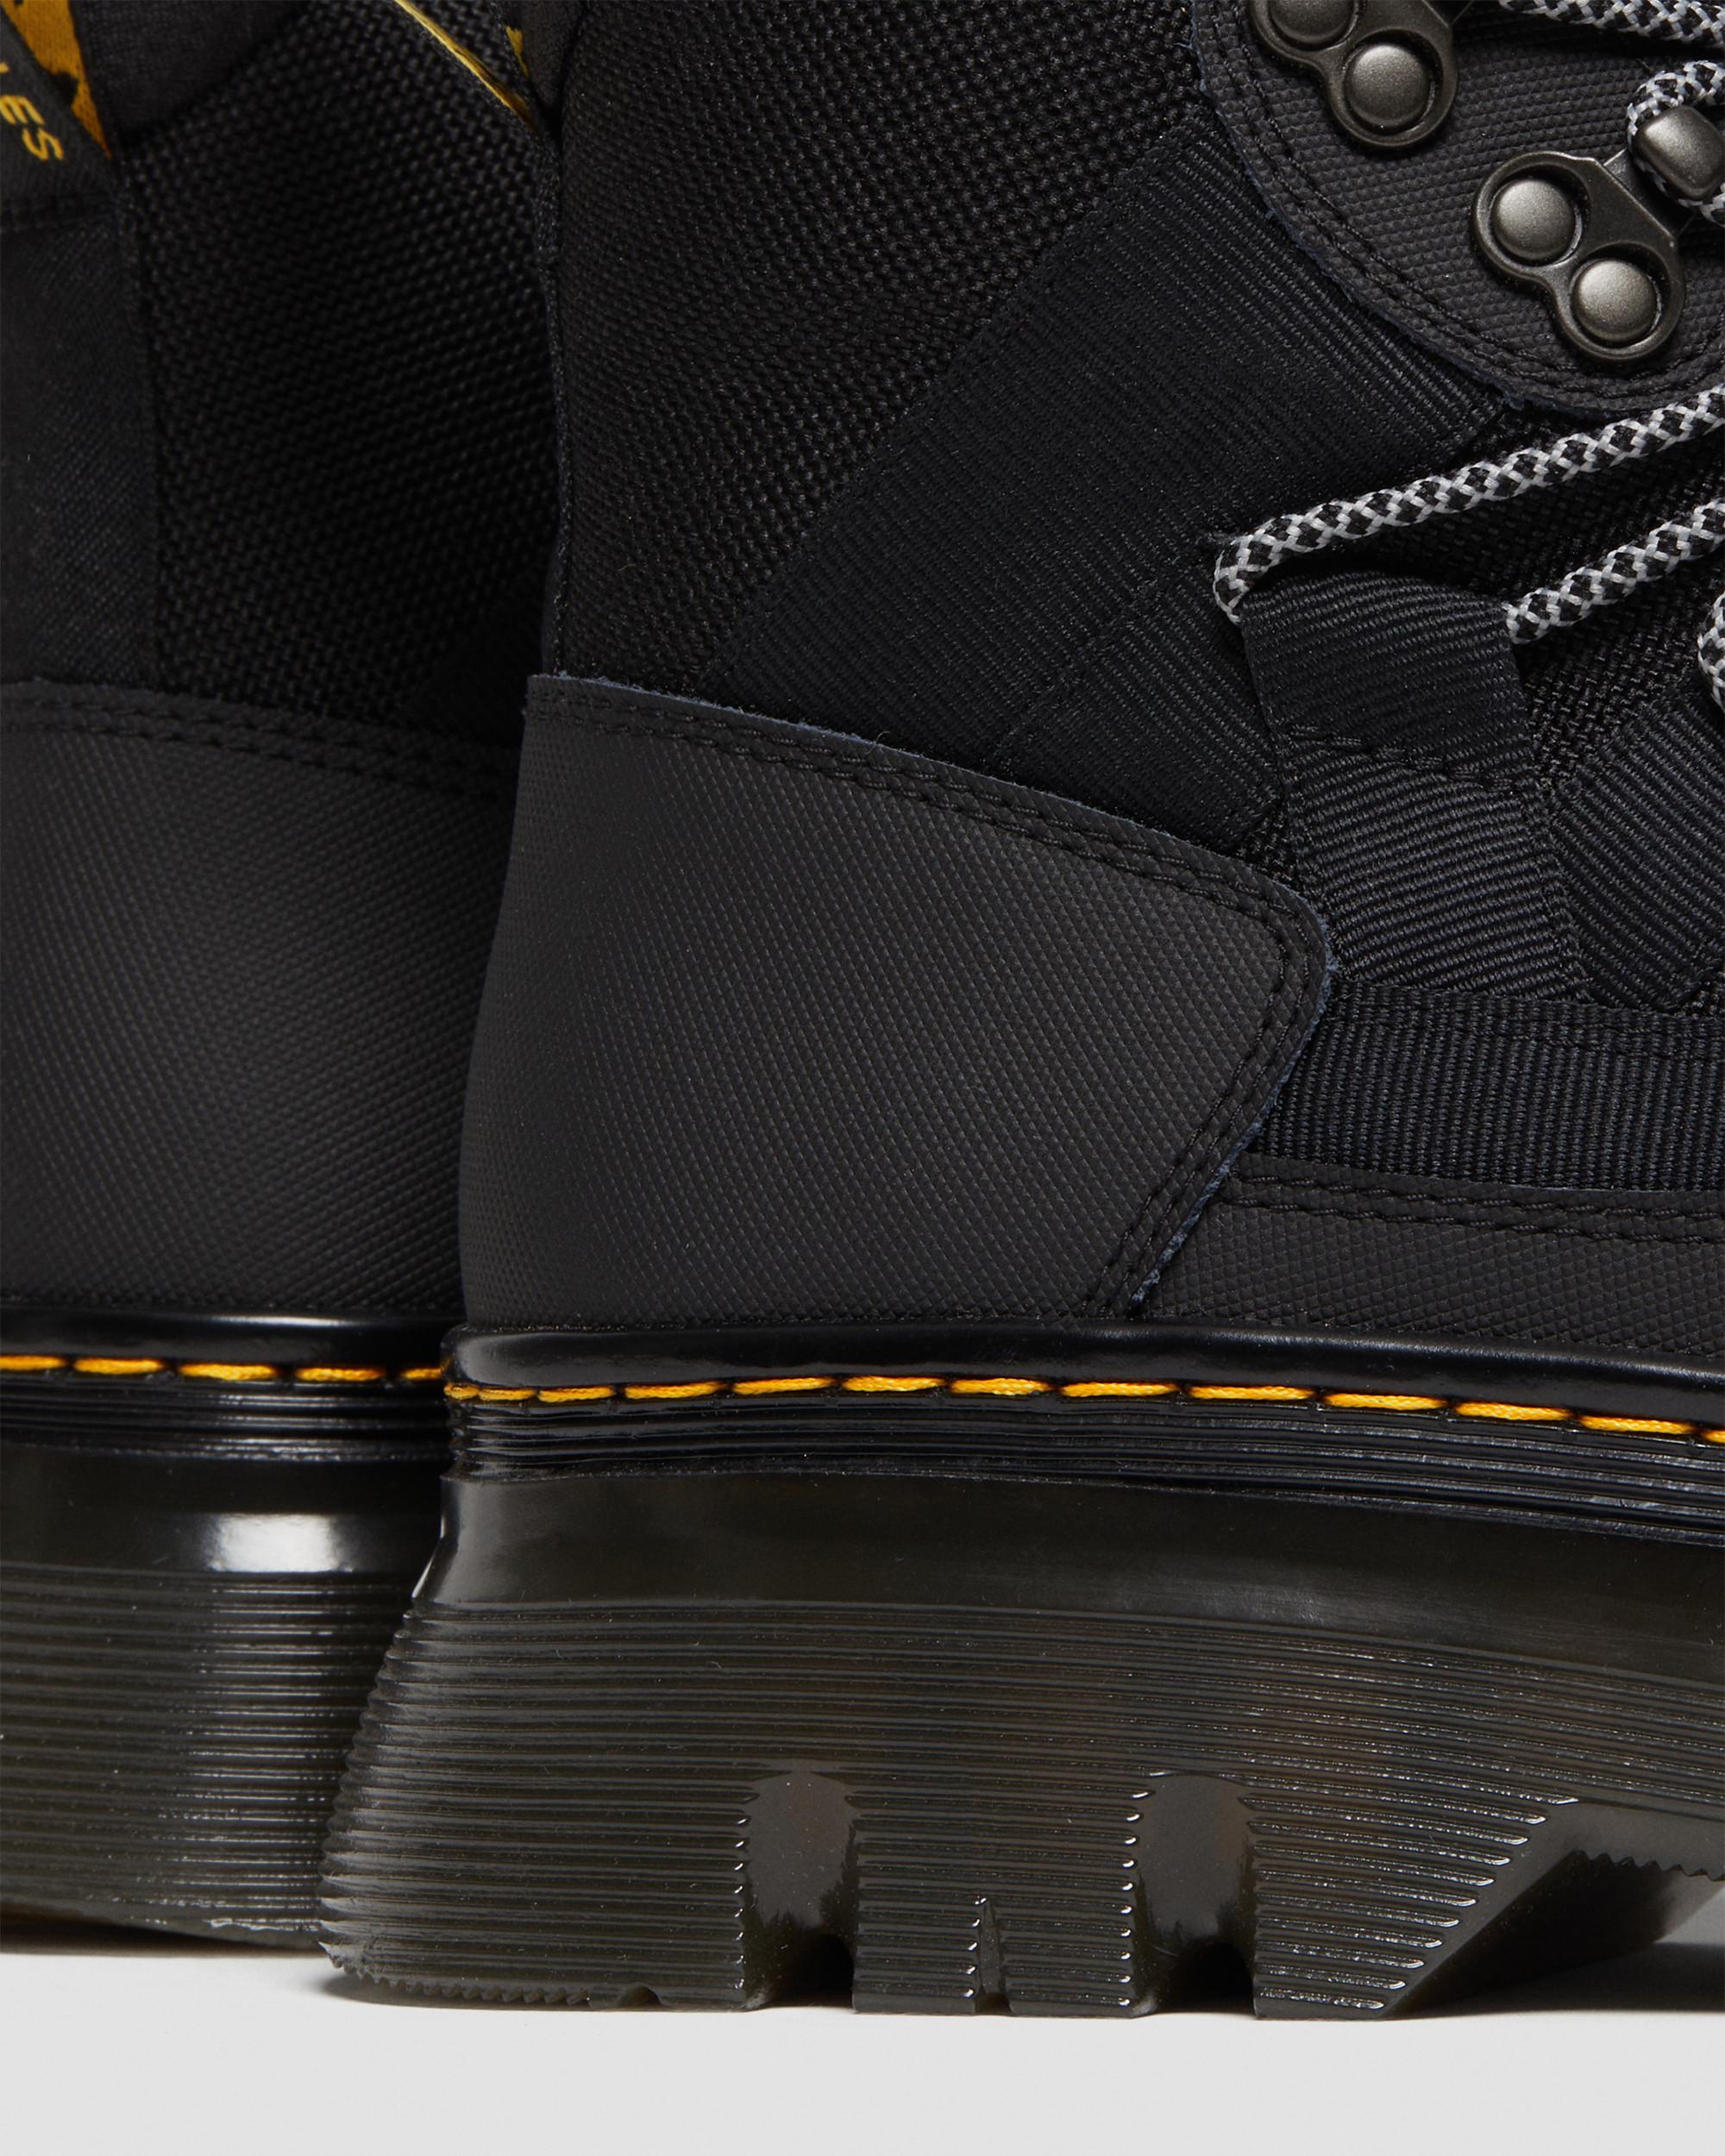 Boury Extra Tough Leather Utility Boots in Black